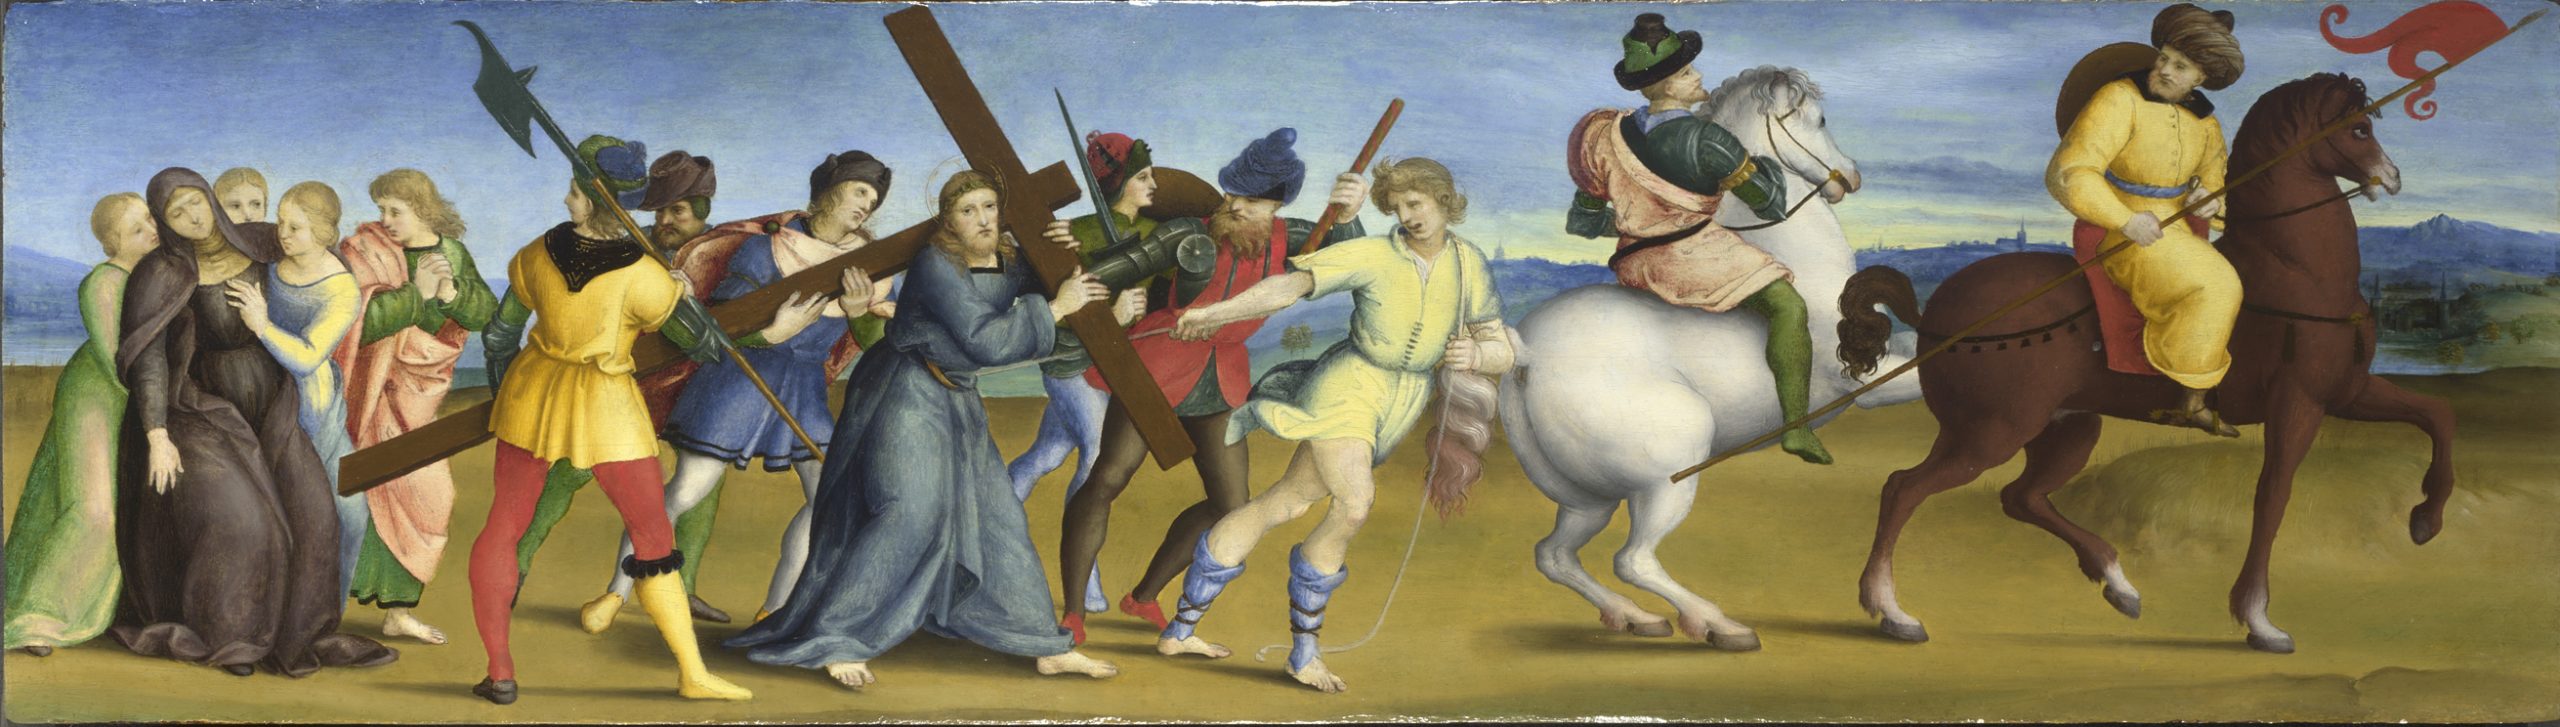 Raphael, The Procession to Calvary, about 1504-5, Oil on poplar, 24.4 x 85.5 cm, © The National Gallery, London